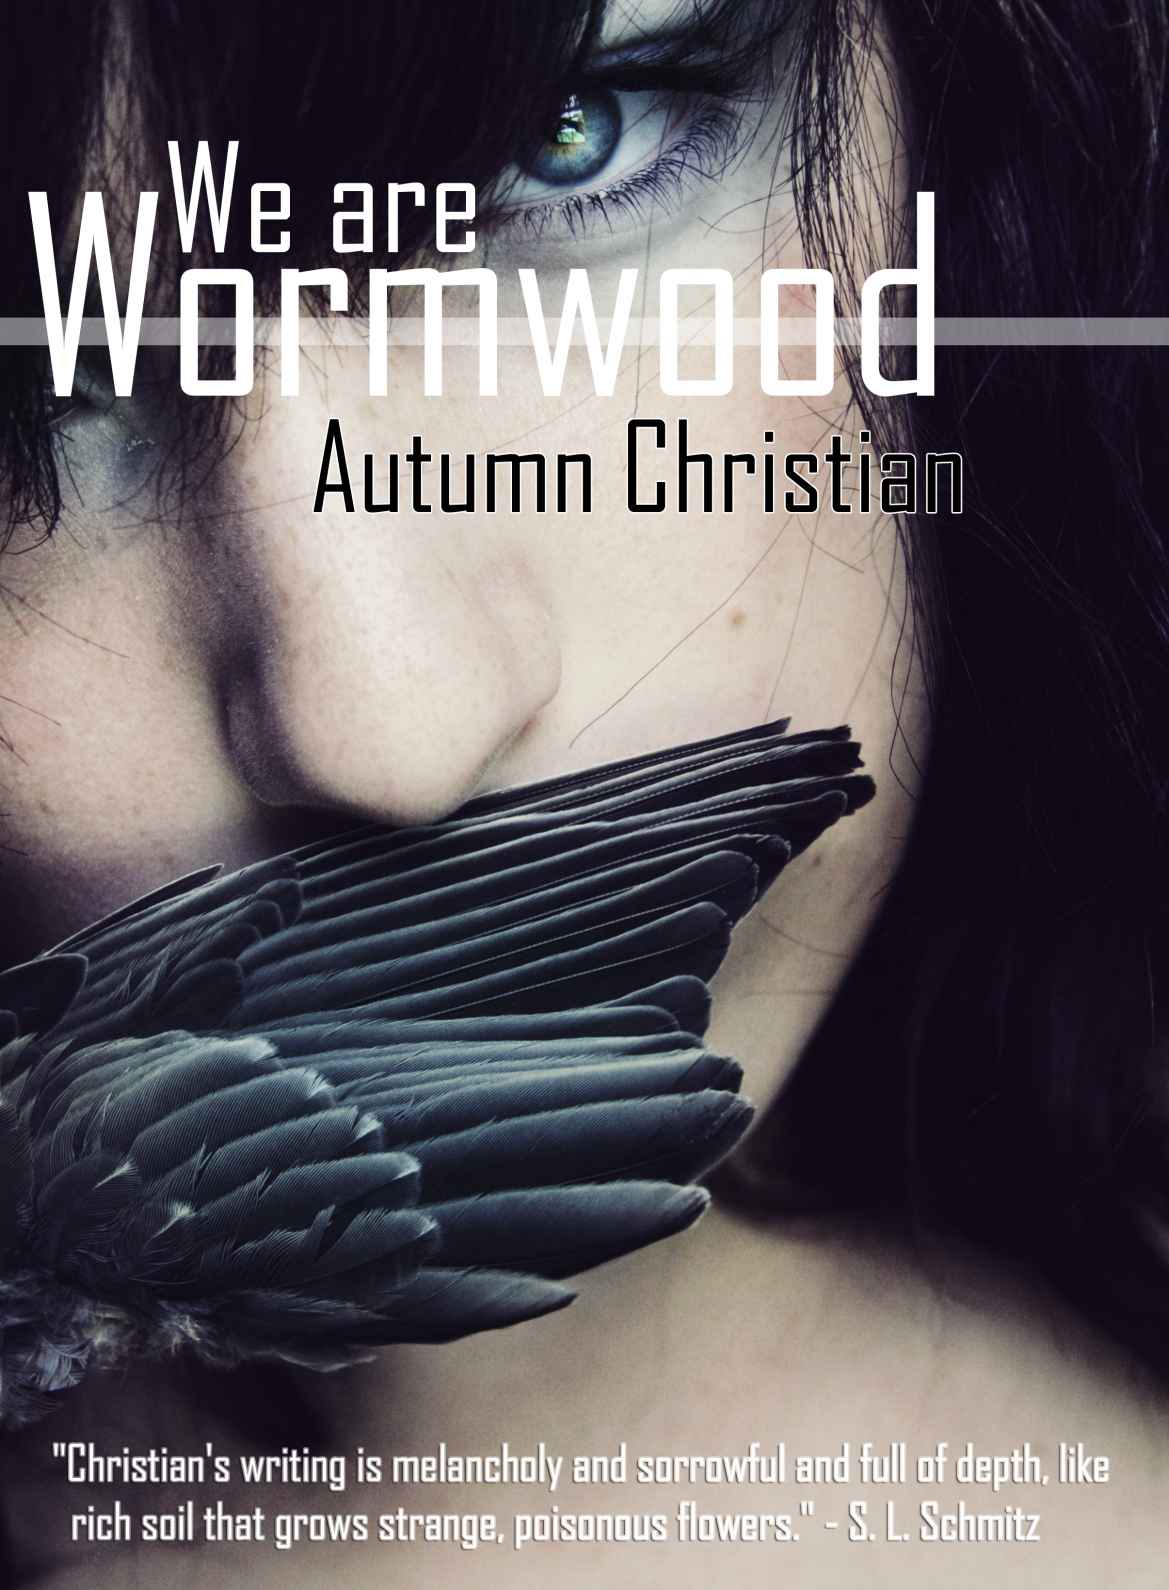 We are Wormwood by Christian, Autumn